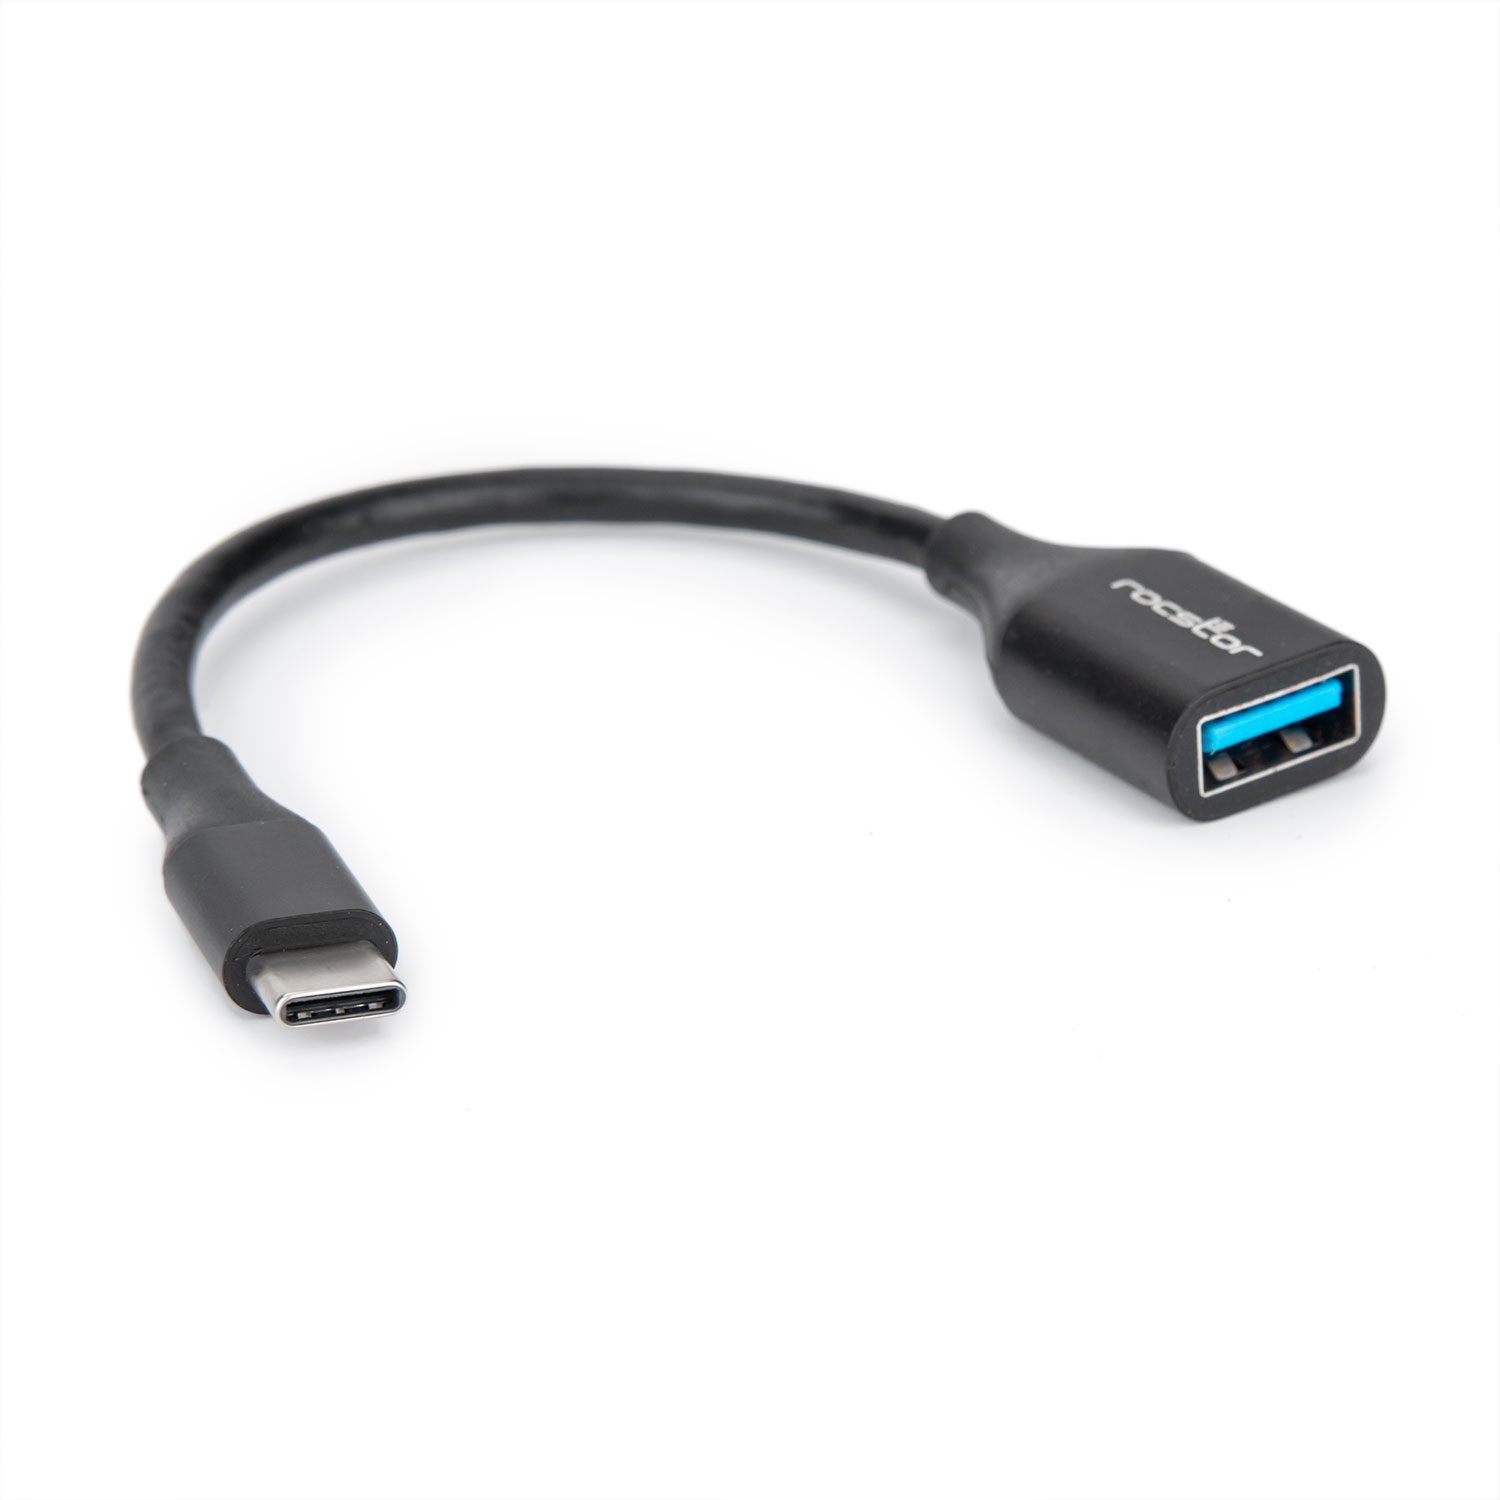 USB-C to USB-A (USB 3.0) Cable Adapter - M/F - 6 in